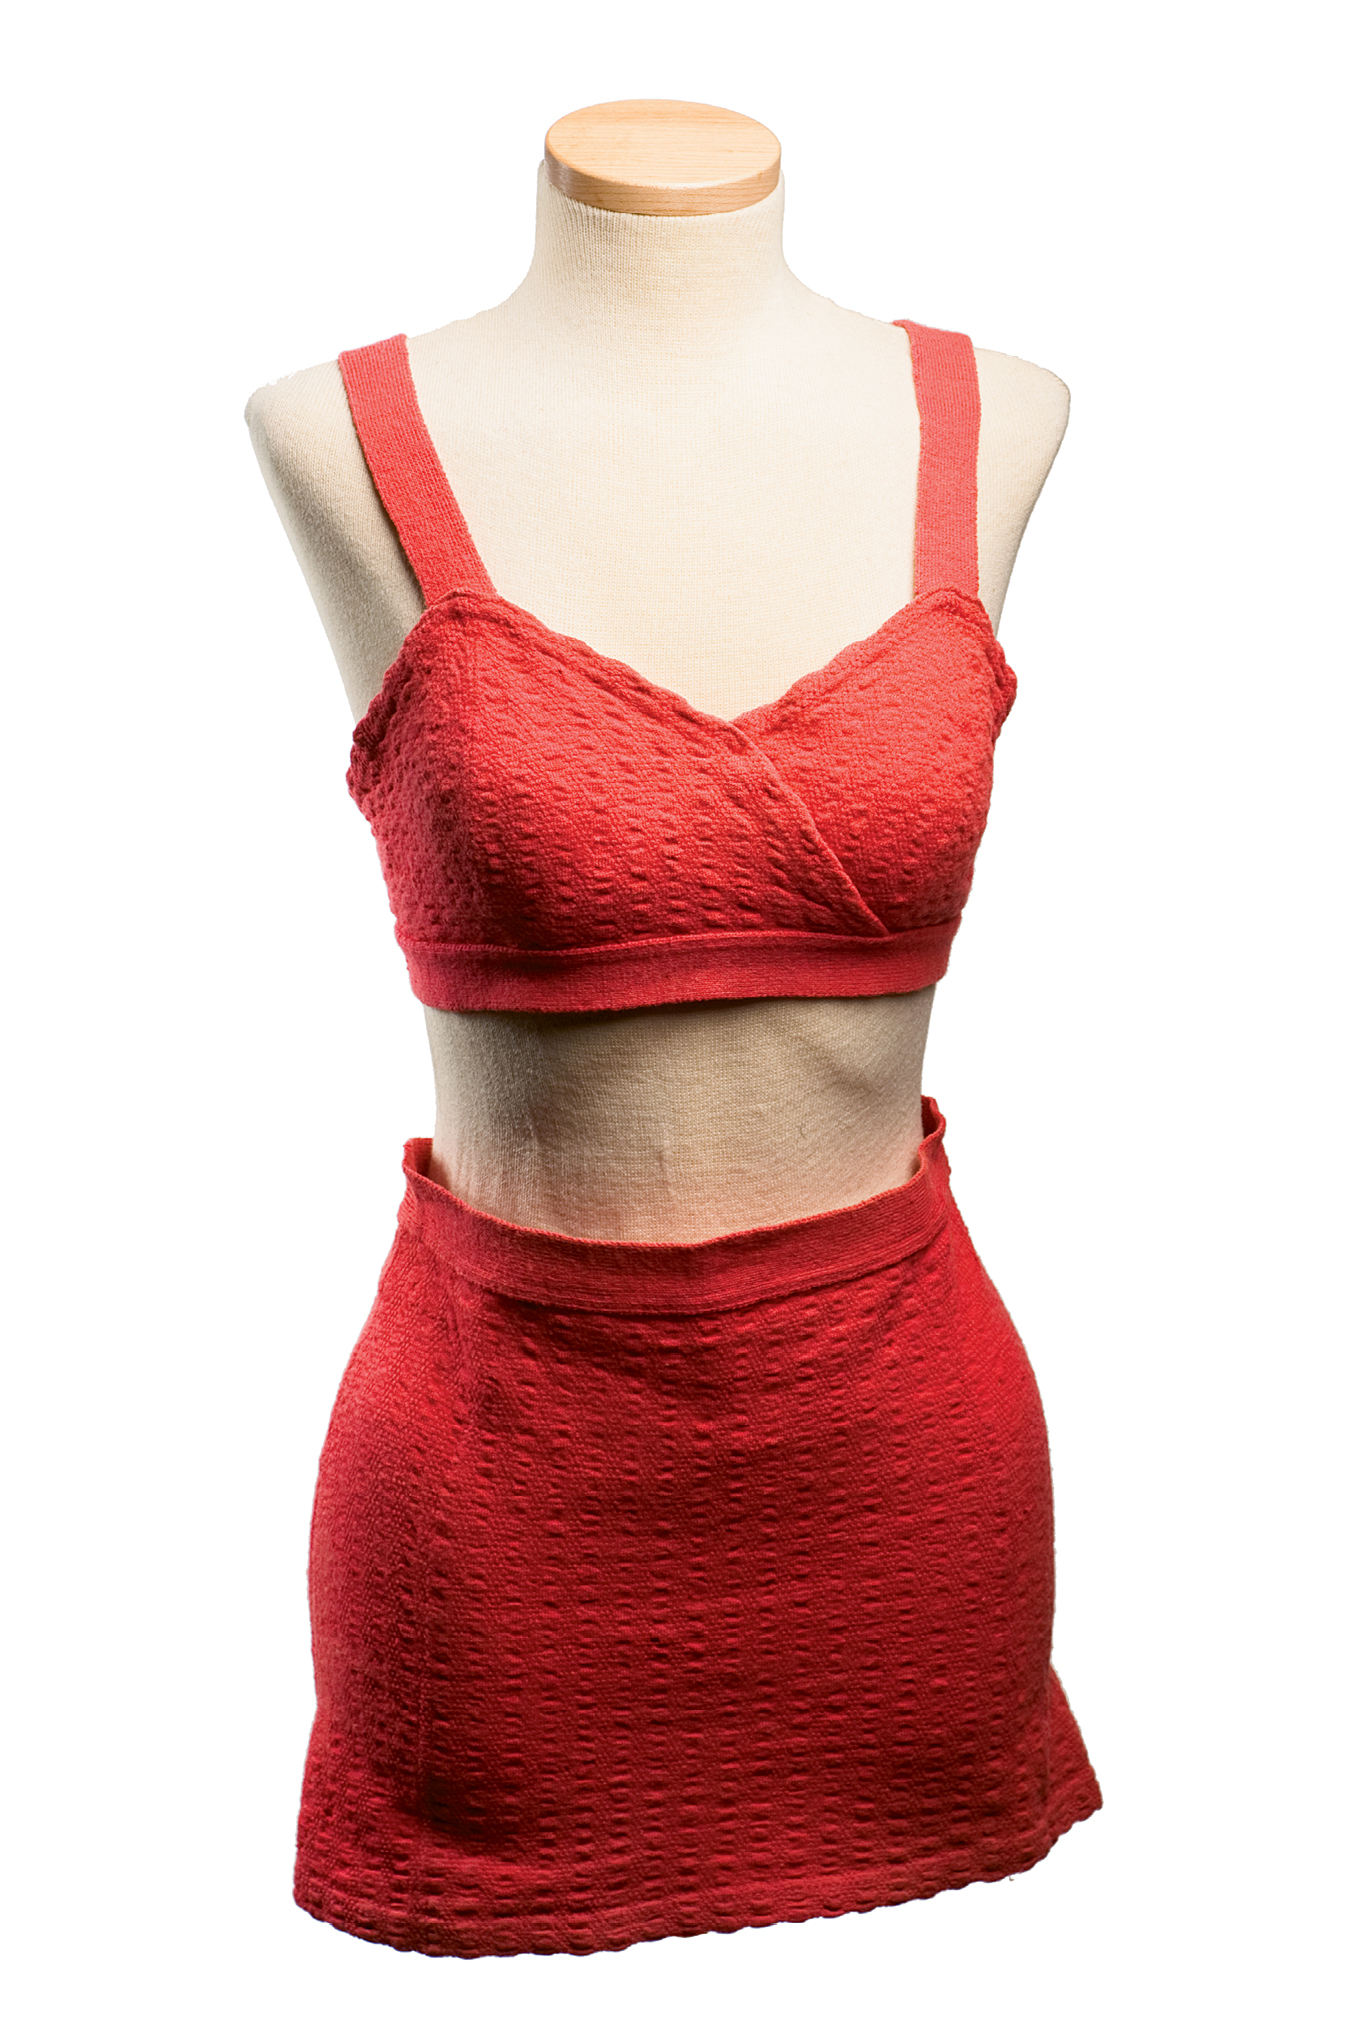 Circa 1949 - Fabric rationing during World War II brought on skin-baring two-piece styles. This knit version by Jantzen was sold at Miss Alta Cunningham’s women’s clothing shop in Greer, South Carolina.